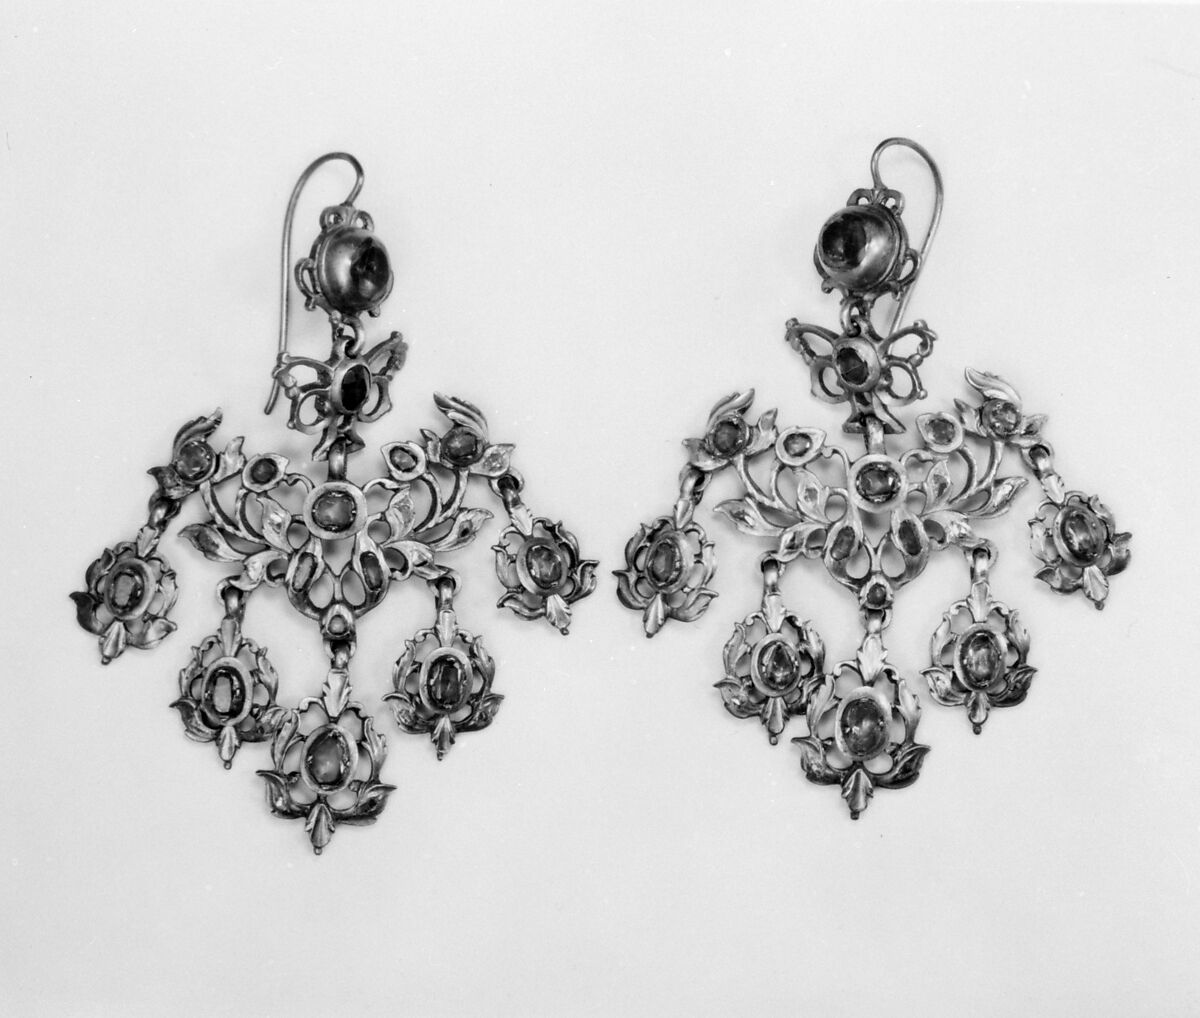 Pair of earrings (part of a set), Silver, silver gilt and rubies, Italian 